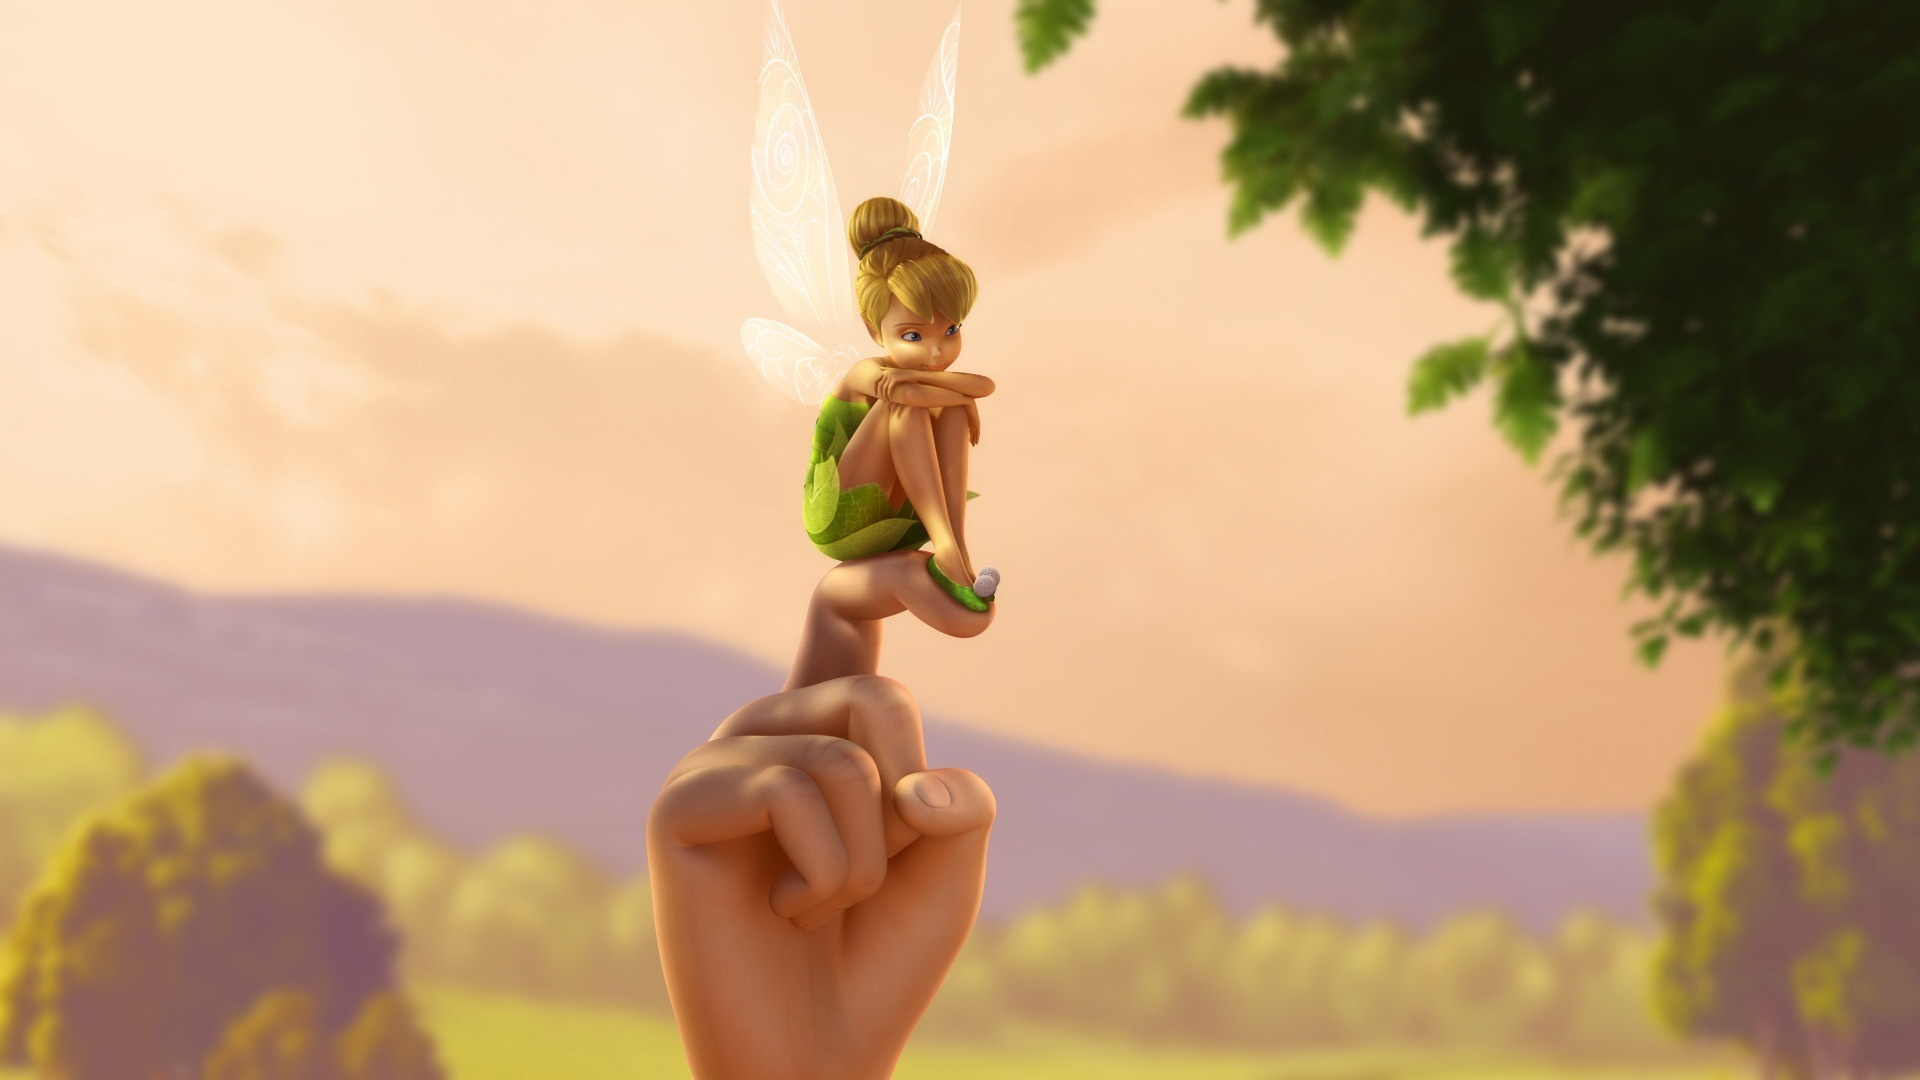 Movie Tinker Bell HD Wallpaper | Background Image